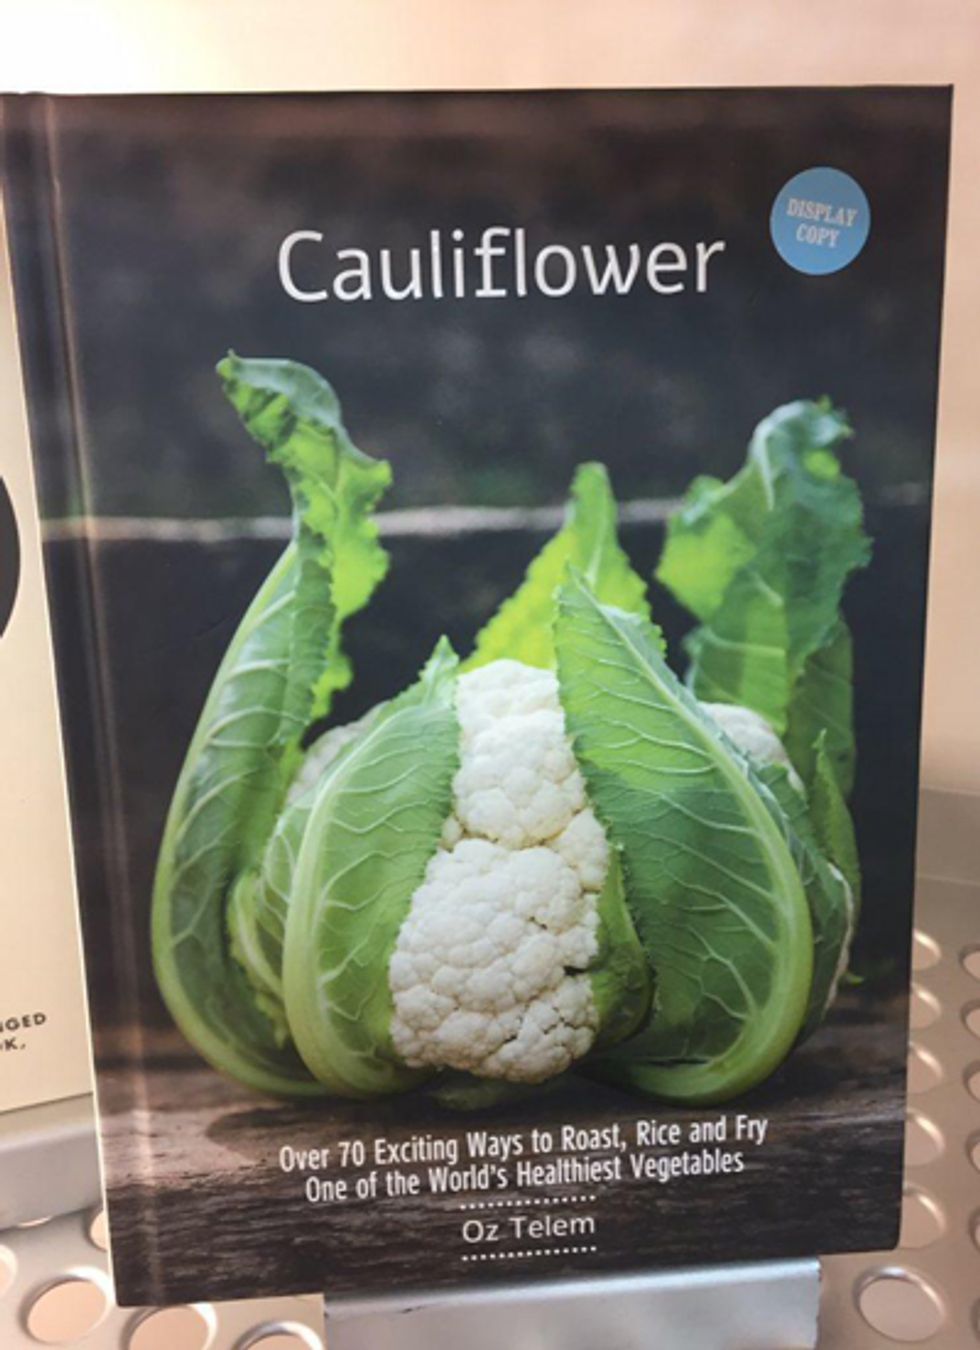 There are so many ways to cook cauliflower.